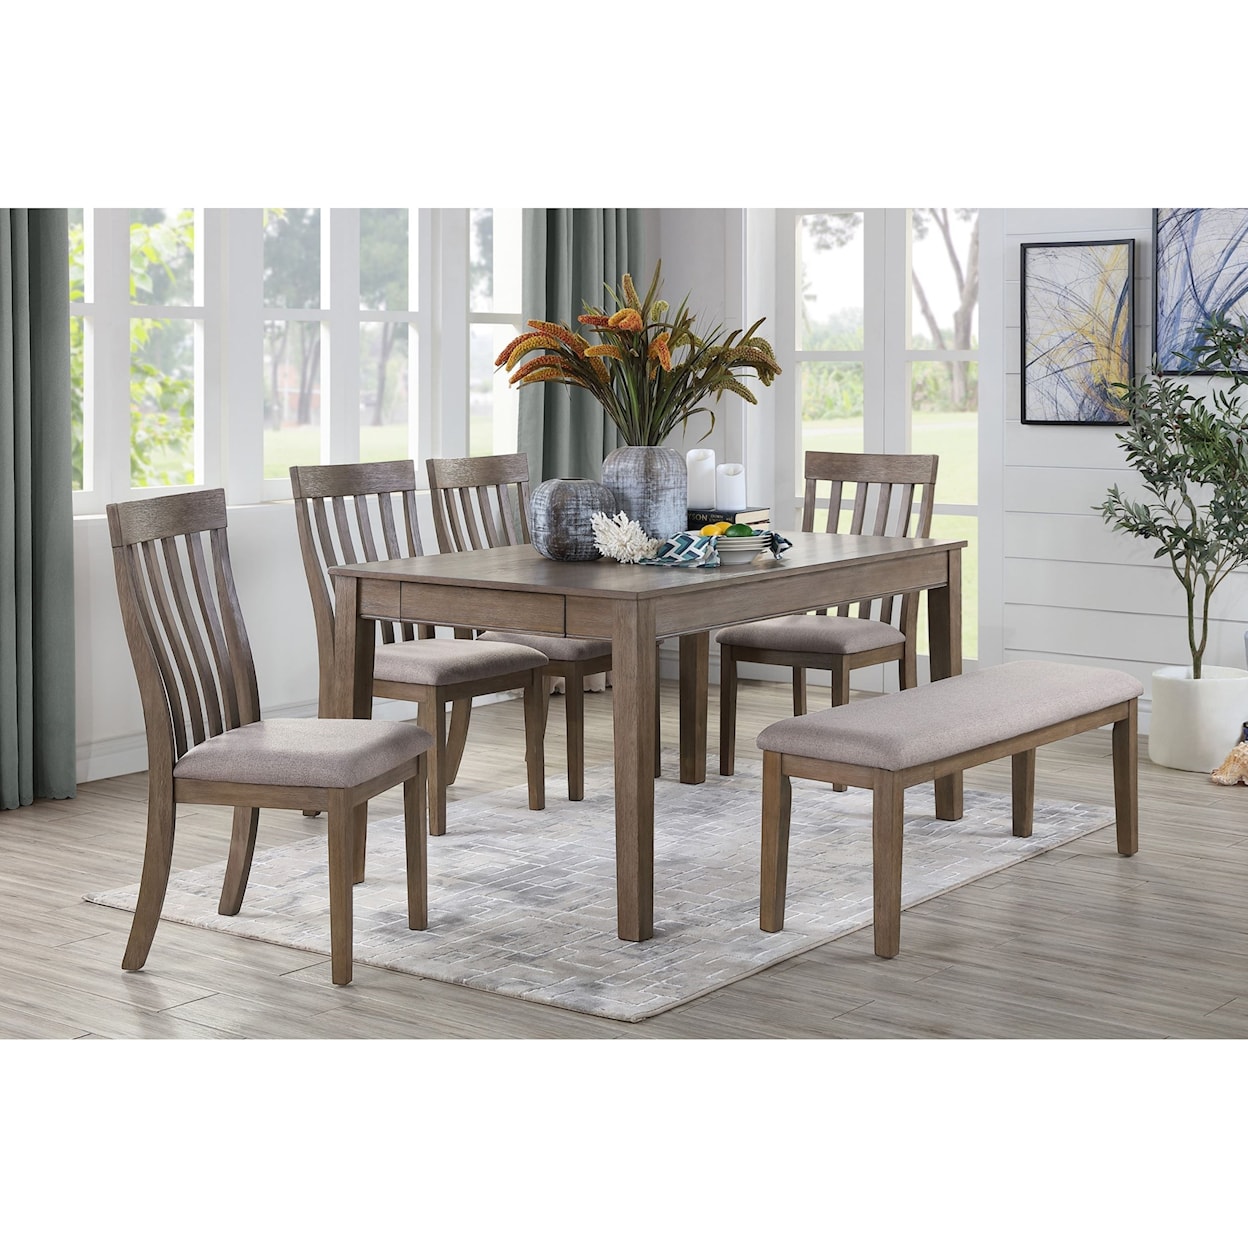 Homelegance Furniture Armhurst 6-Piece Table and Chair Set with Bench